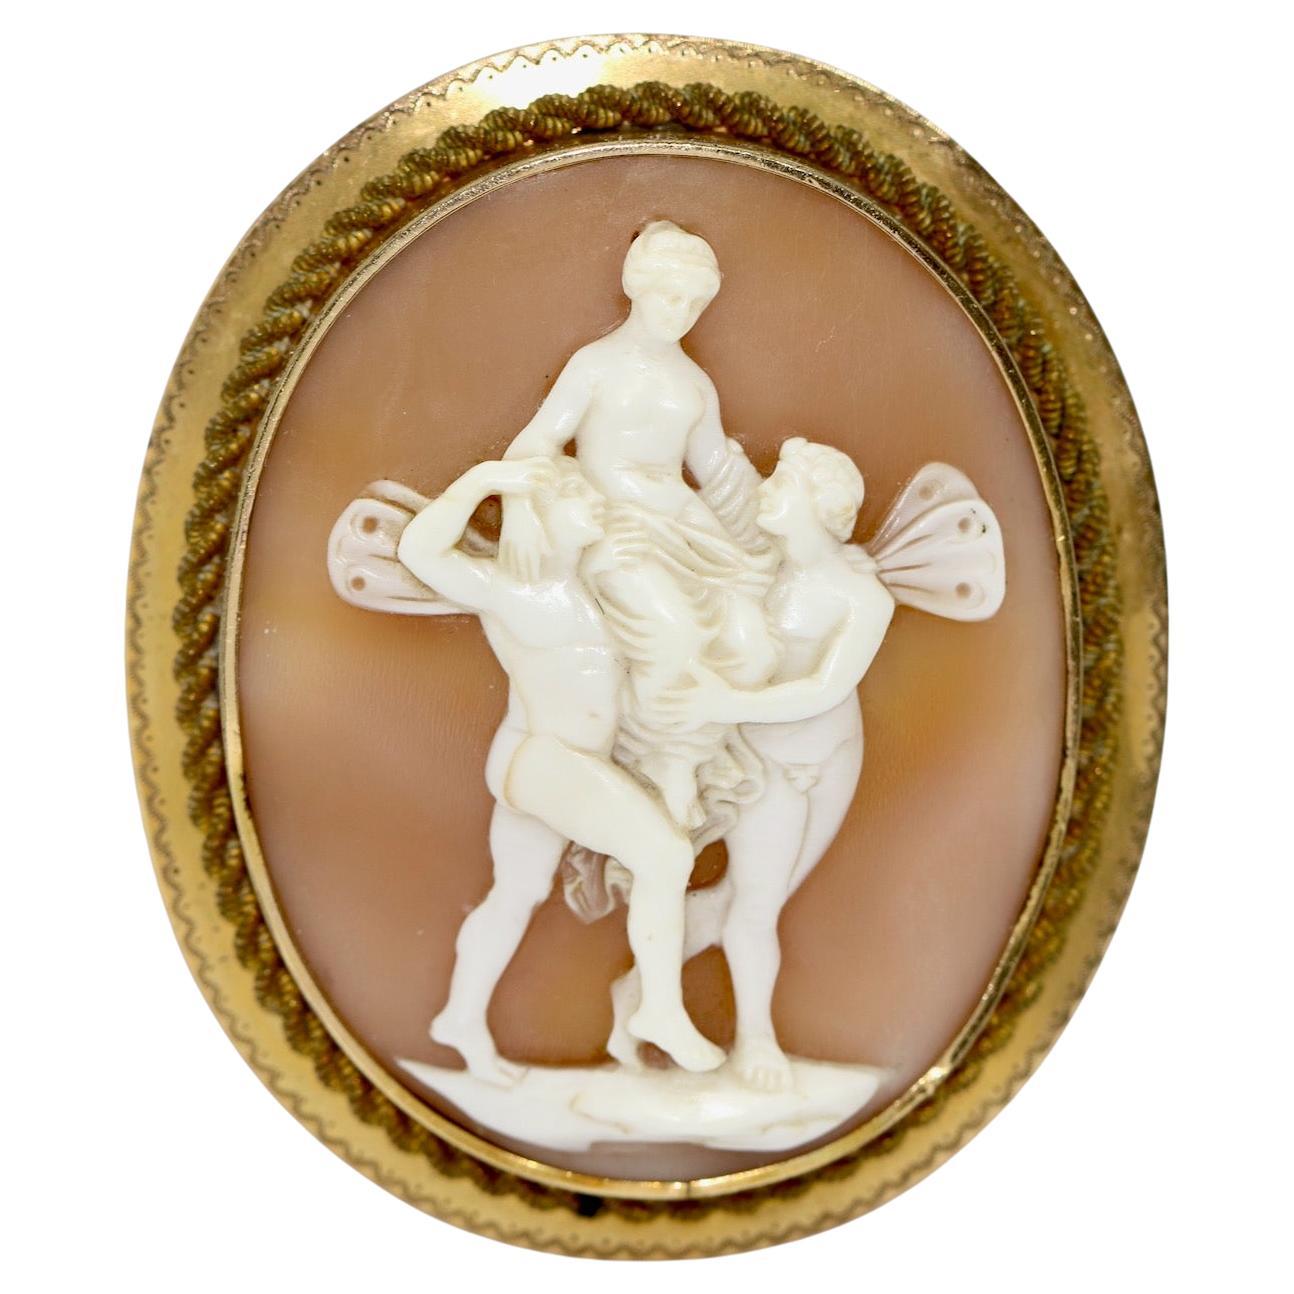 Antique, Large Cameo Brooch For Sale